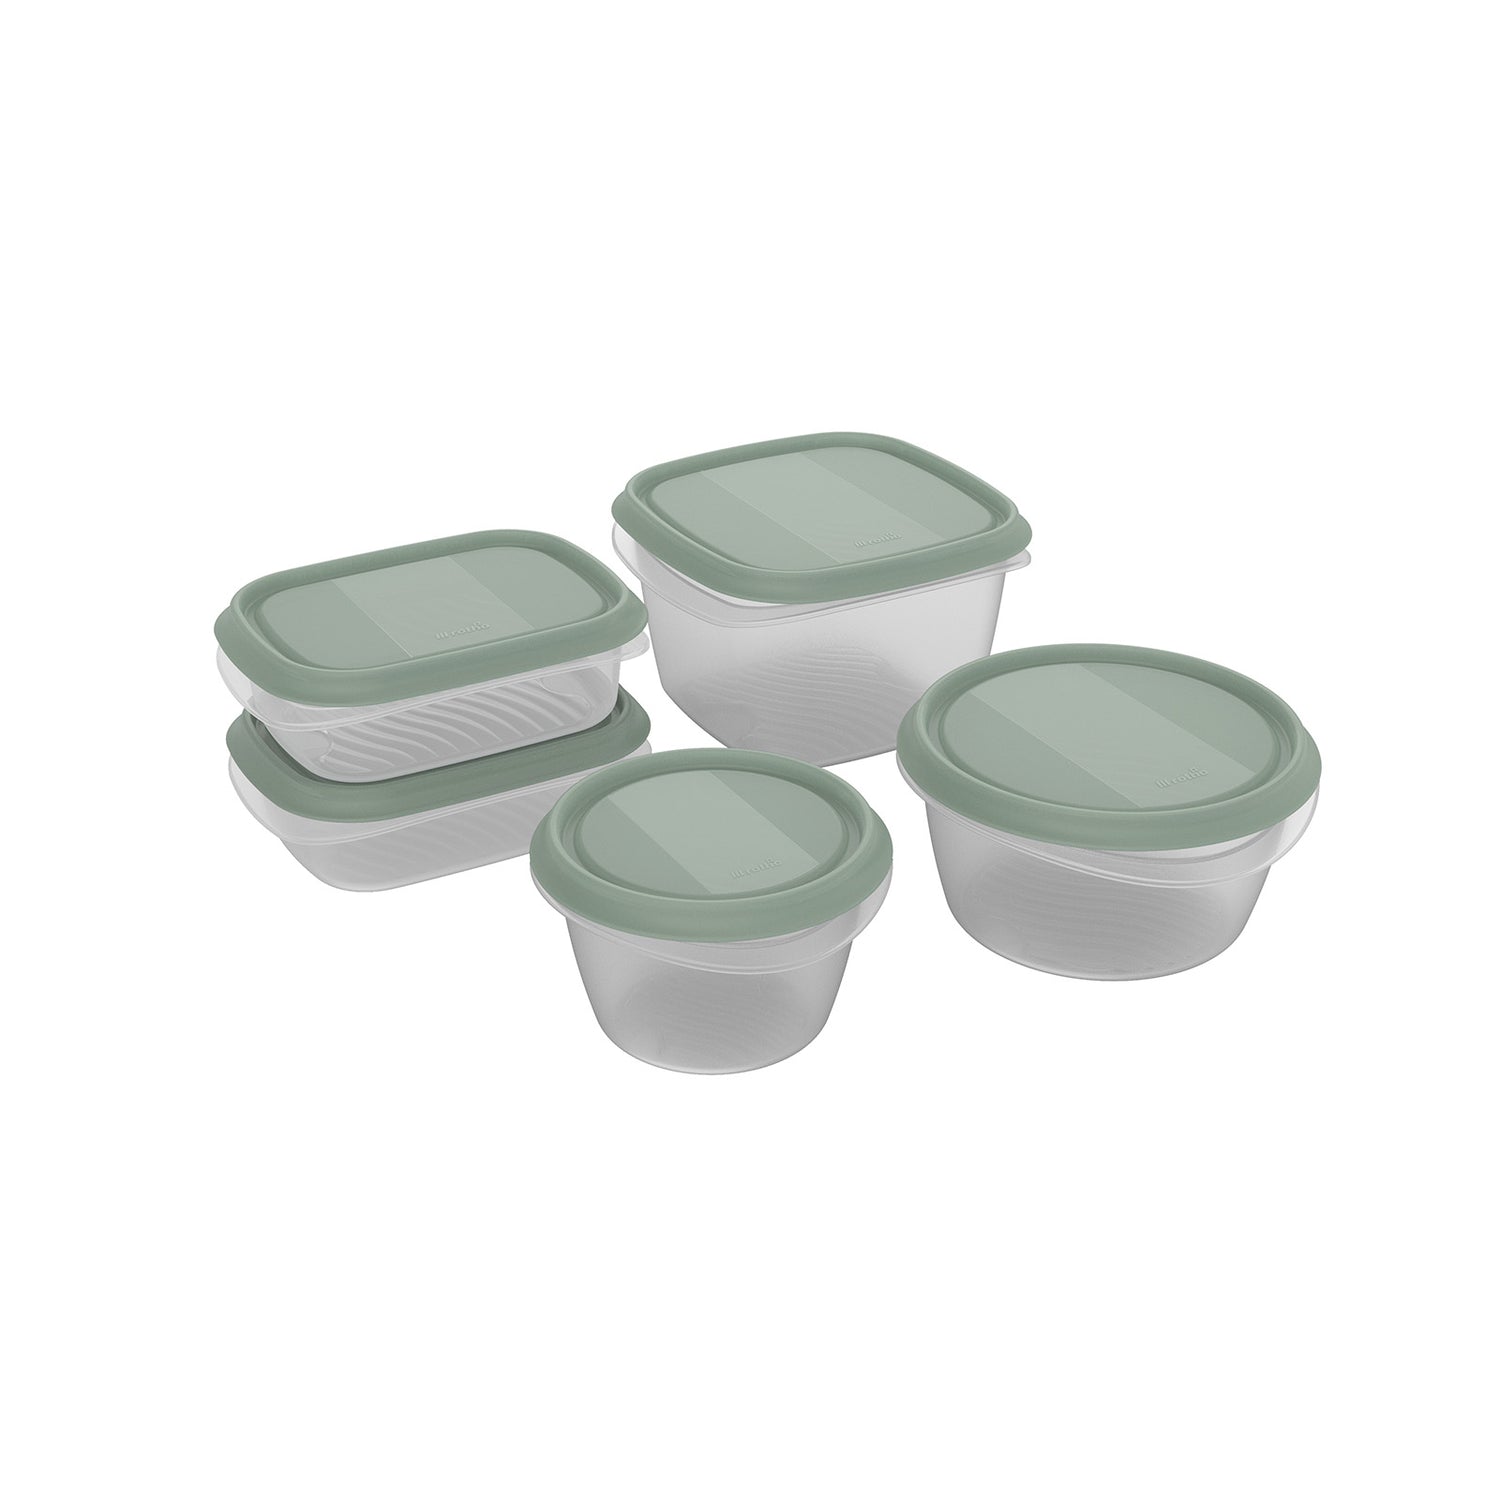 Set of freshness containers 5 pcs. ELEMENTS